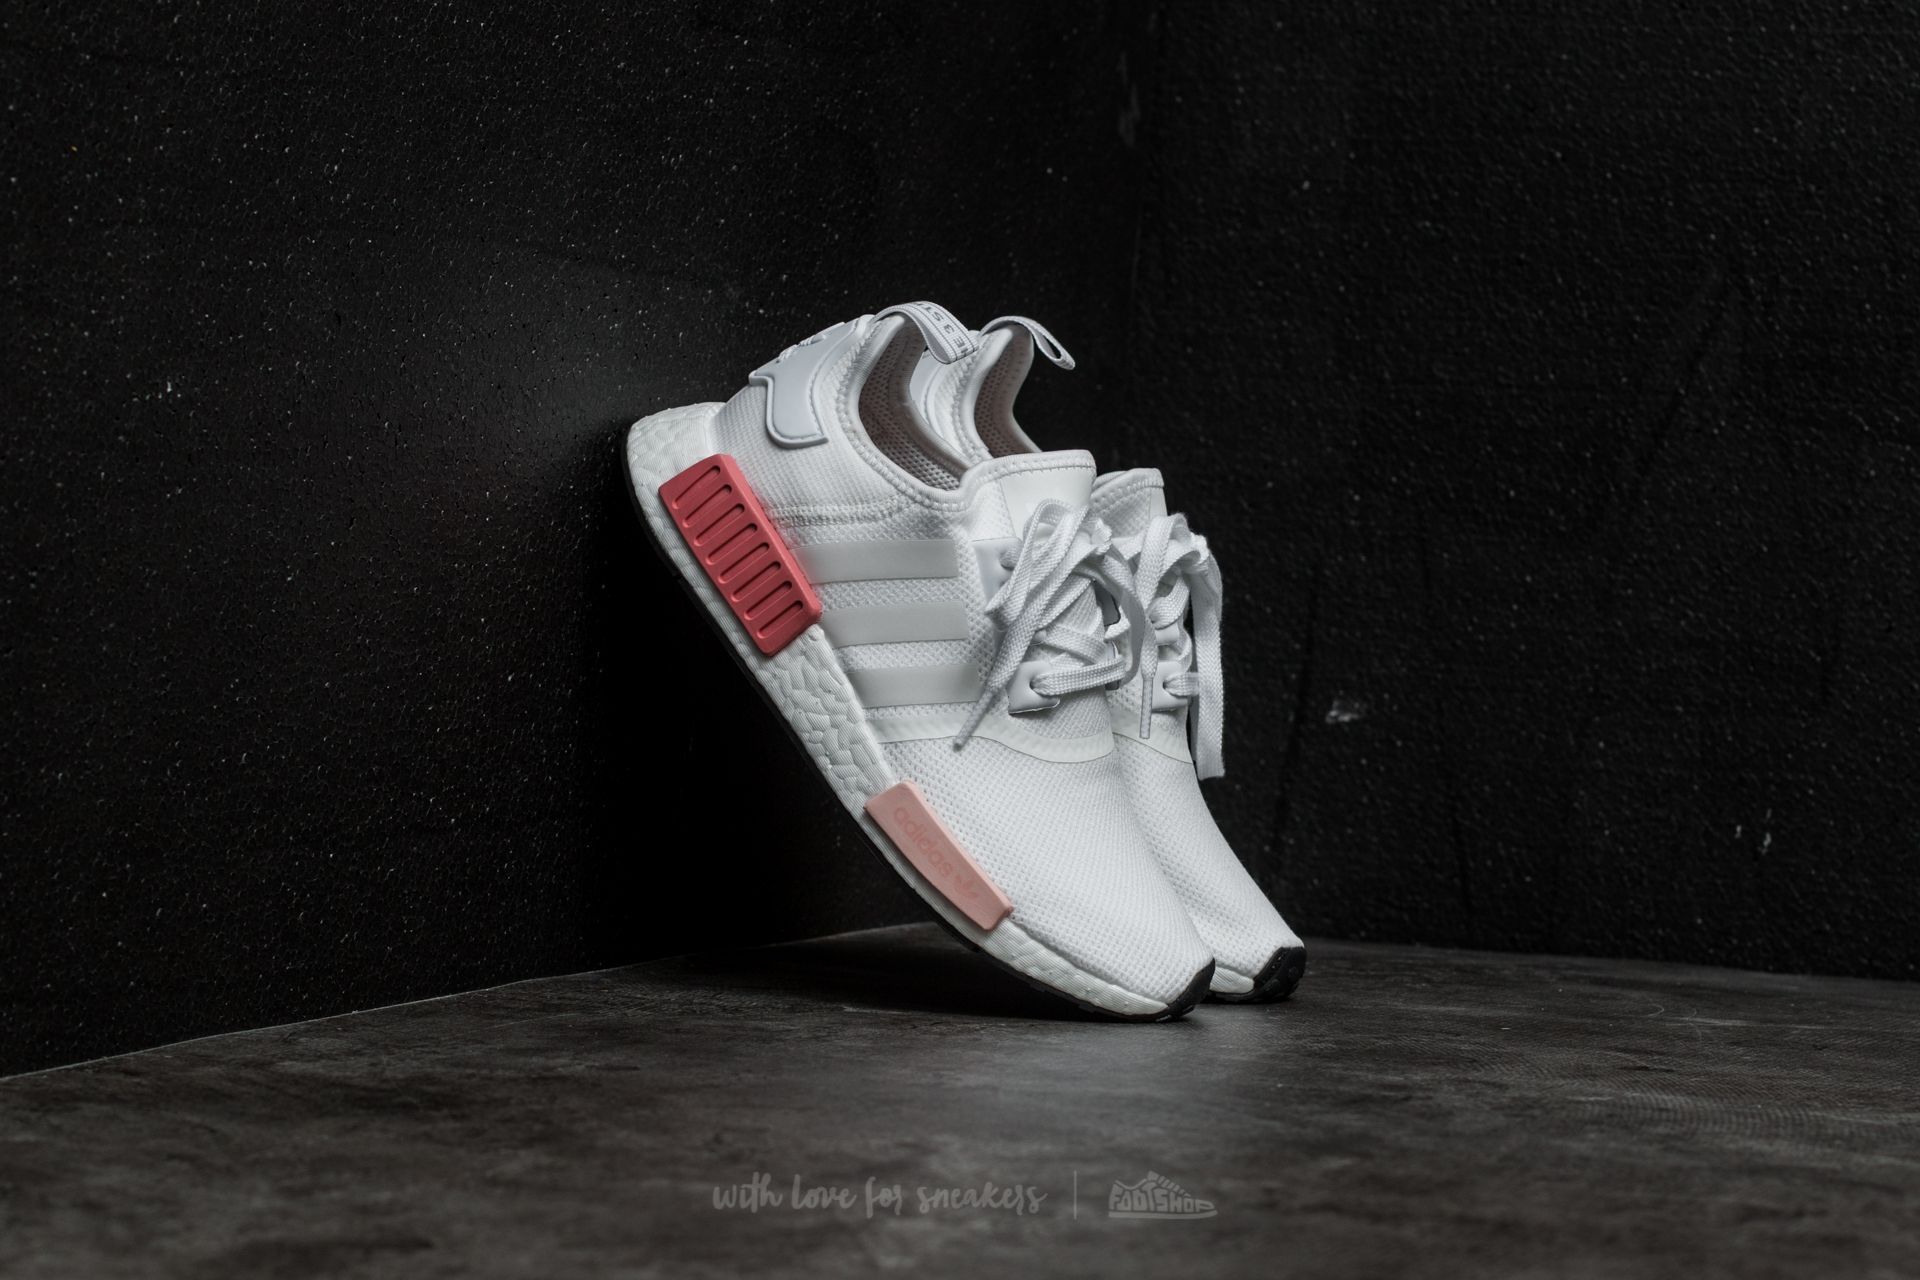 Chaussures et baskets femme adidas NMD_R1 W Ftw White/ Ftw White/ Icey Pink